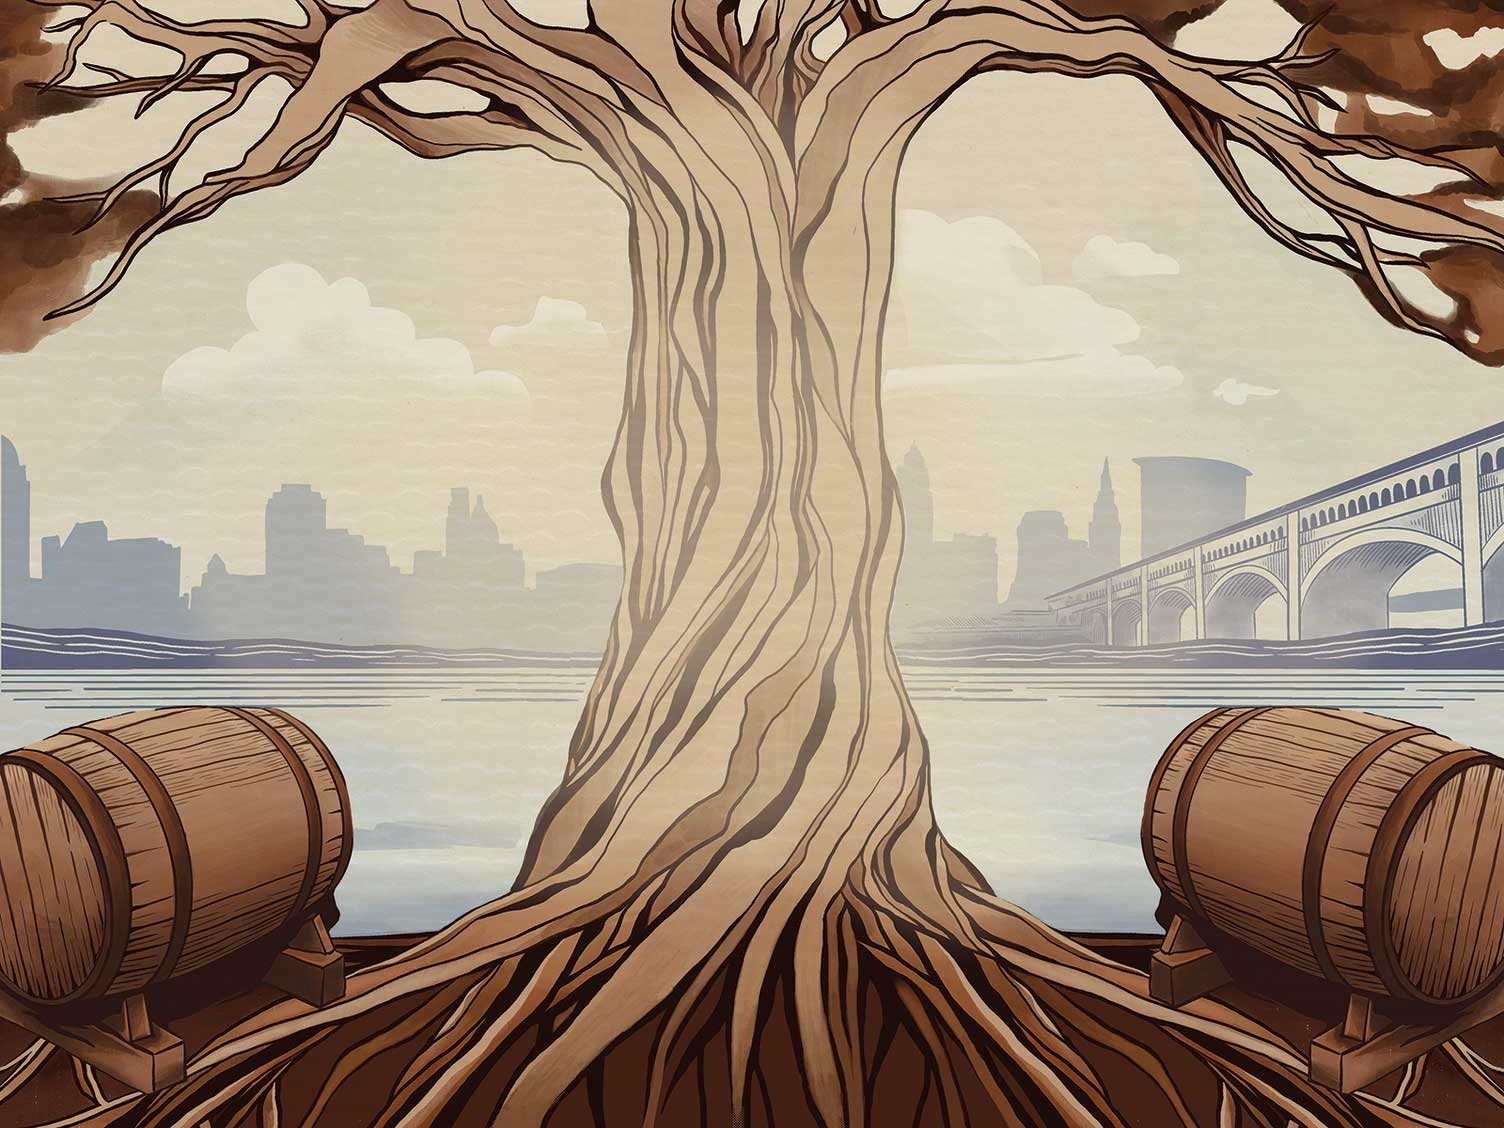 Illustration of a tree and two whiskey barrels